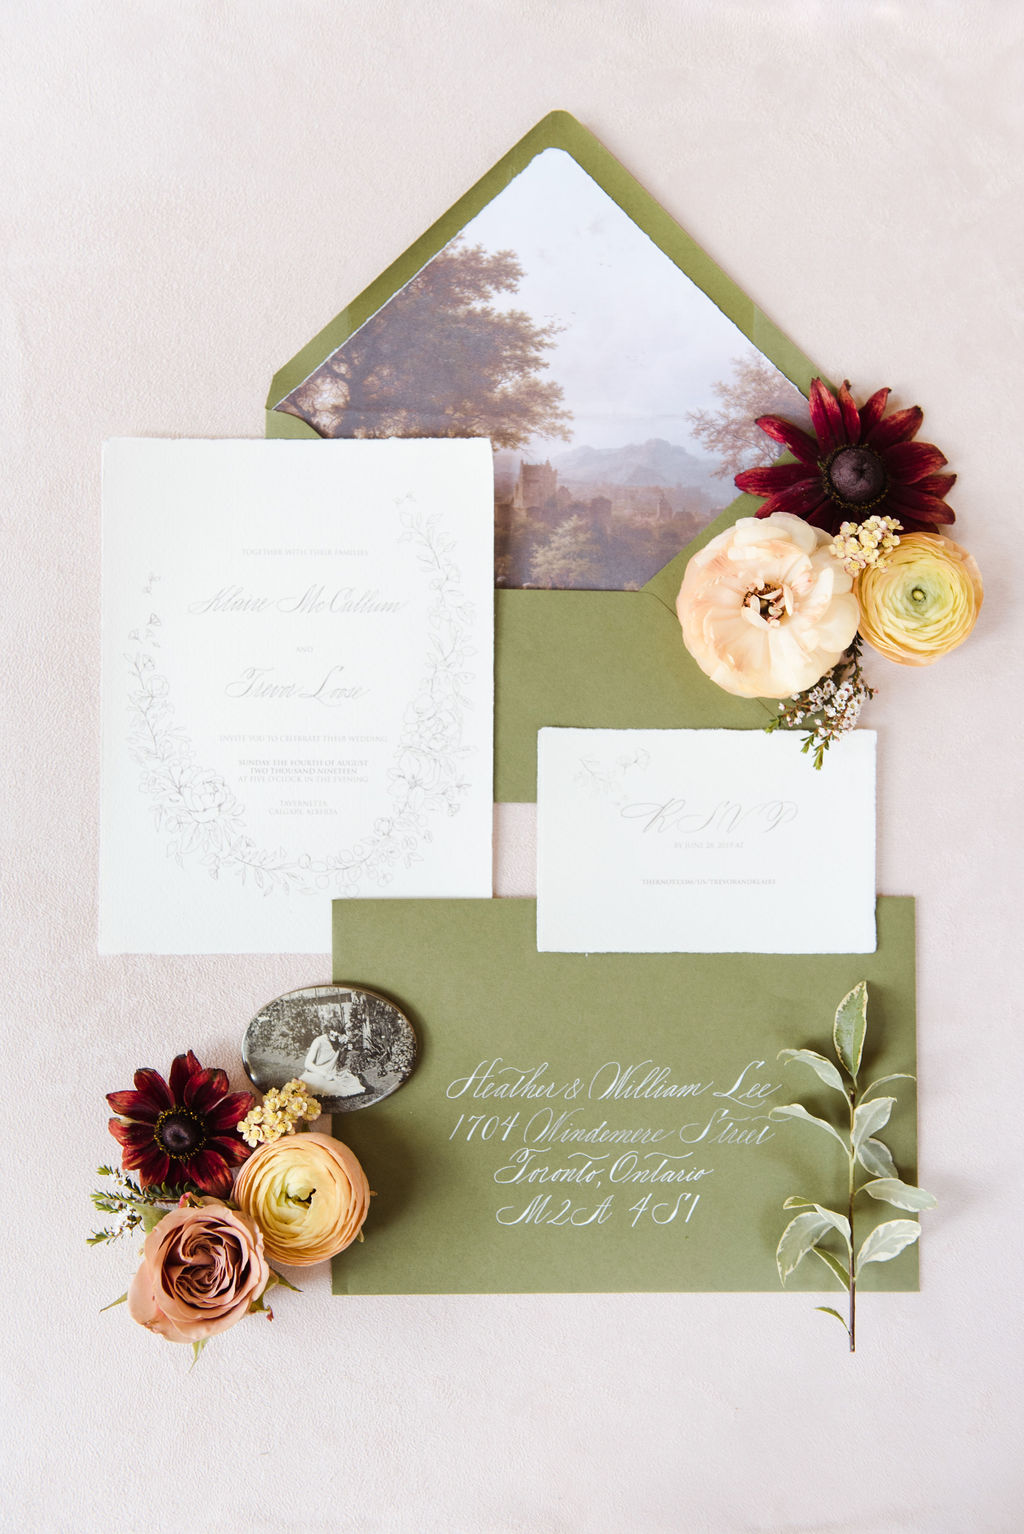 Olive wedding stationery designed by Debbie Wong designs styled with tangerine and blush whimsical florals